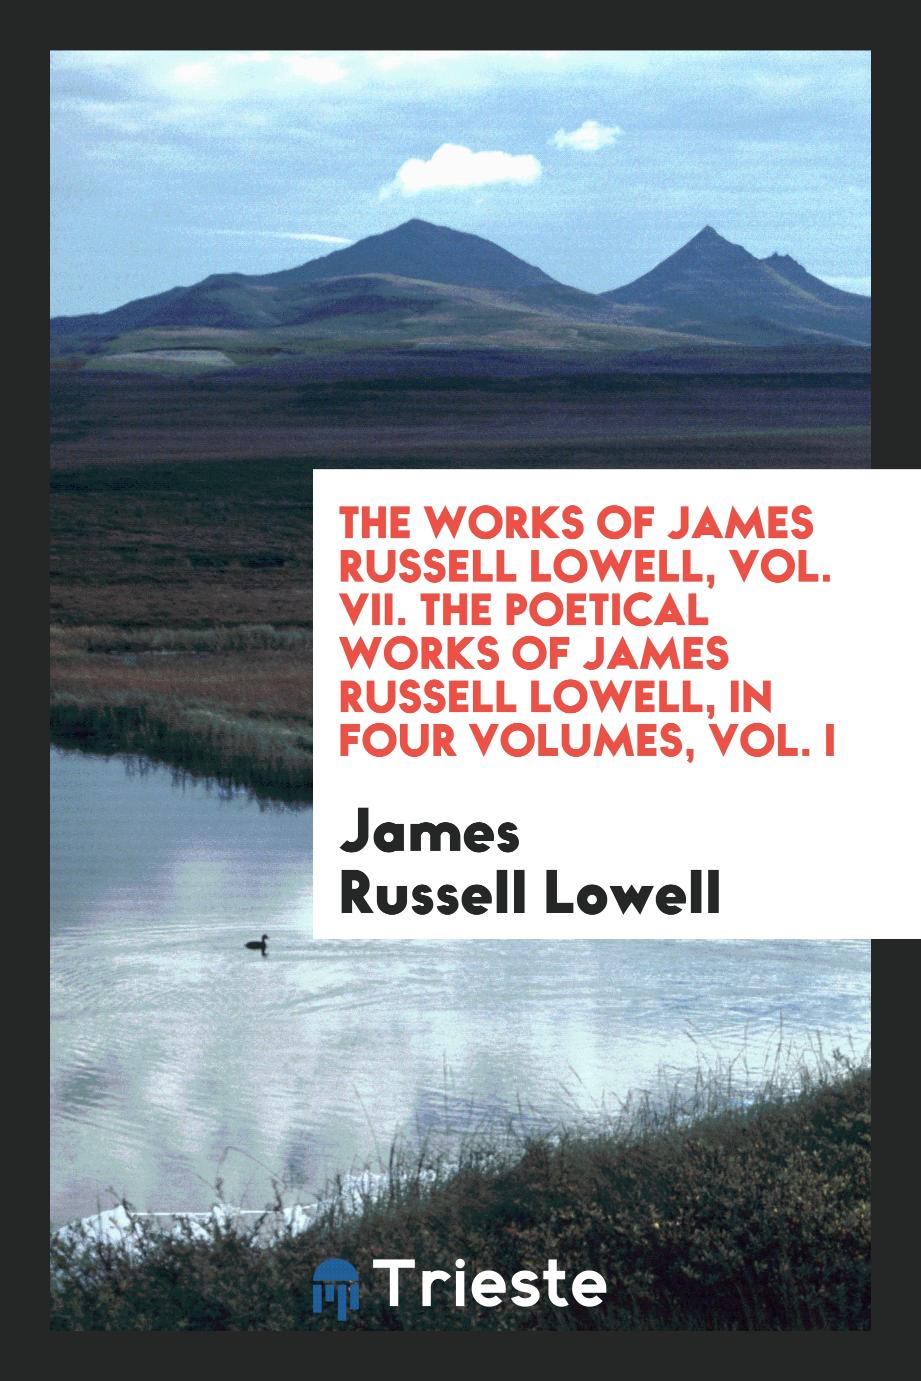 The Works of James Russell Lowell, Vol. VII. The Poetical Works of James Russell Lowell, in Four Volumes, Vol. I